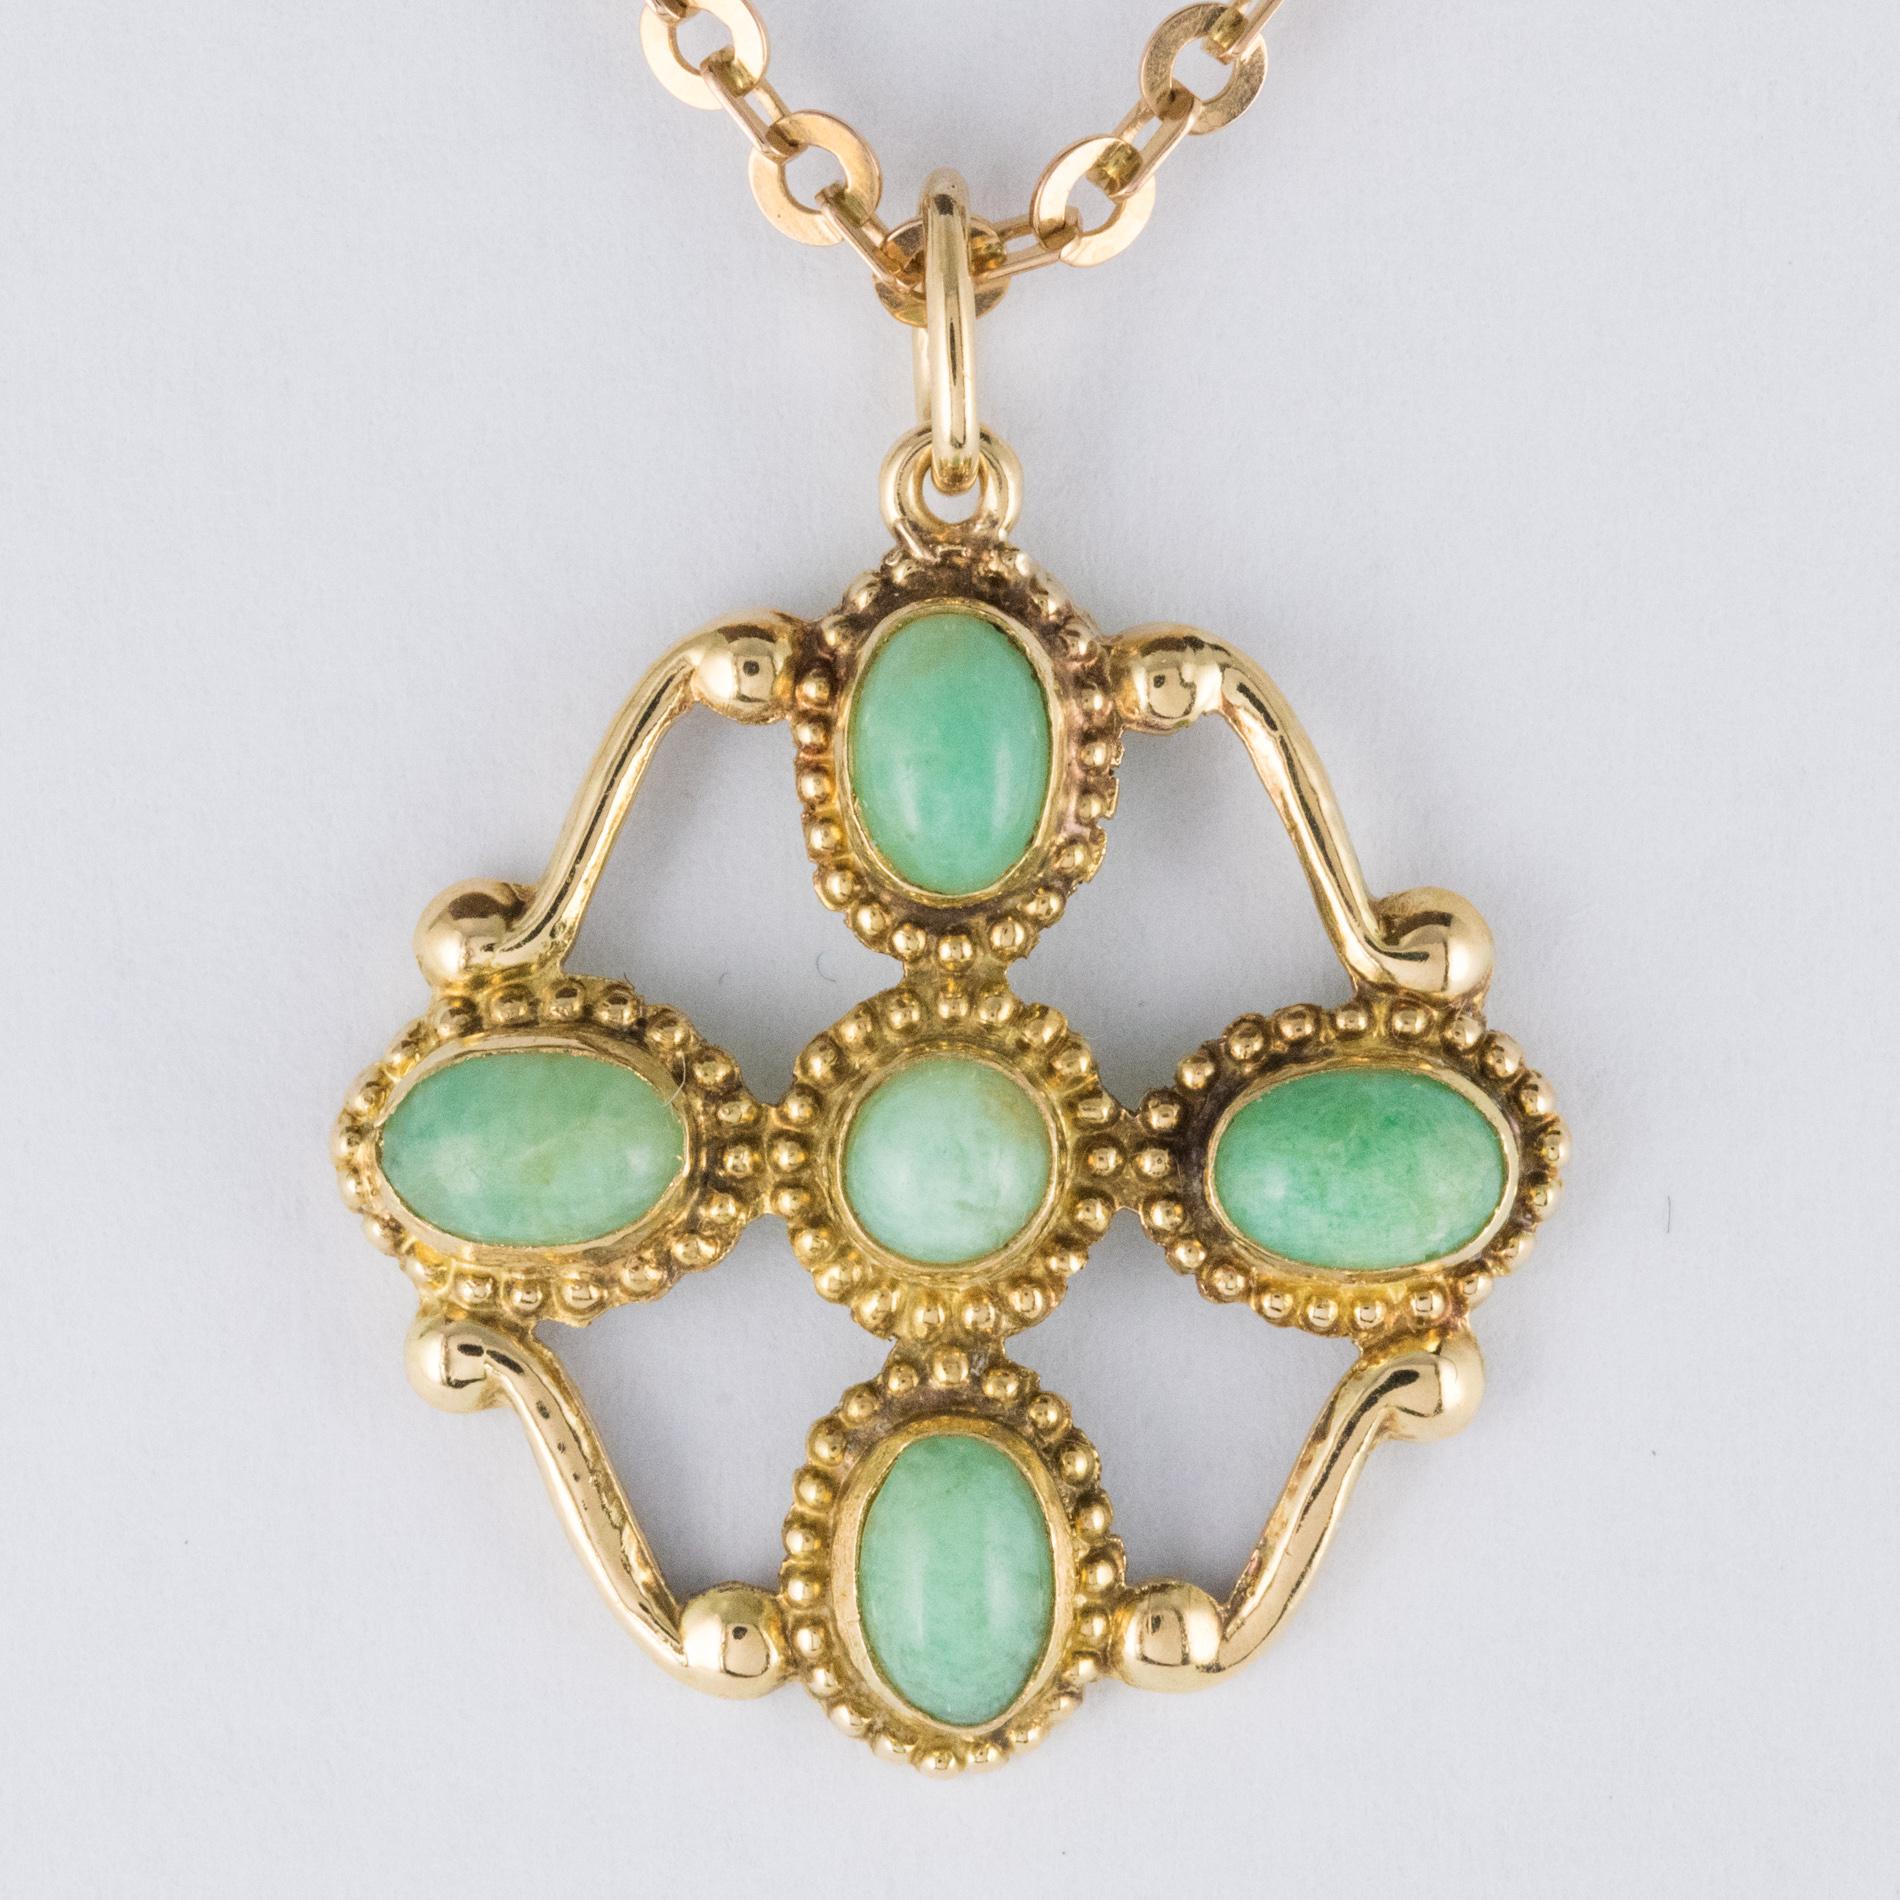 1960s Vintage 18 Karat Yellow Gold Amazonite Pendant Necklace and Chain 3